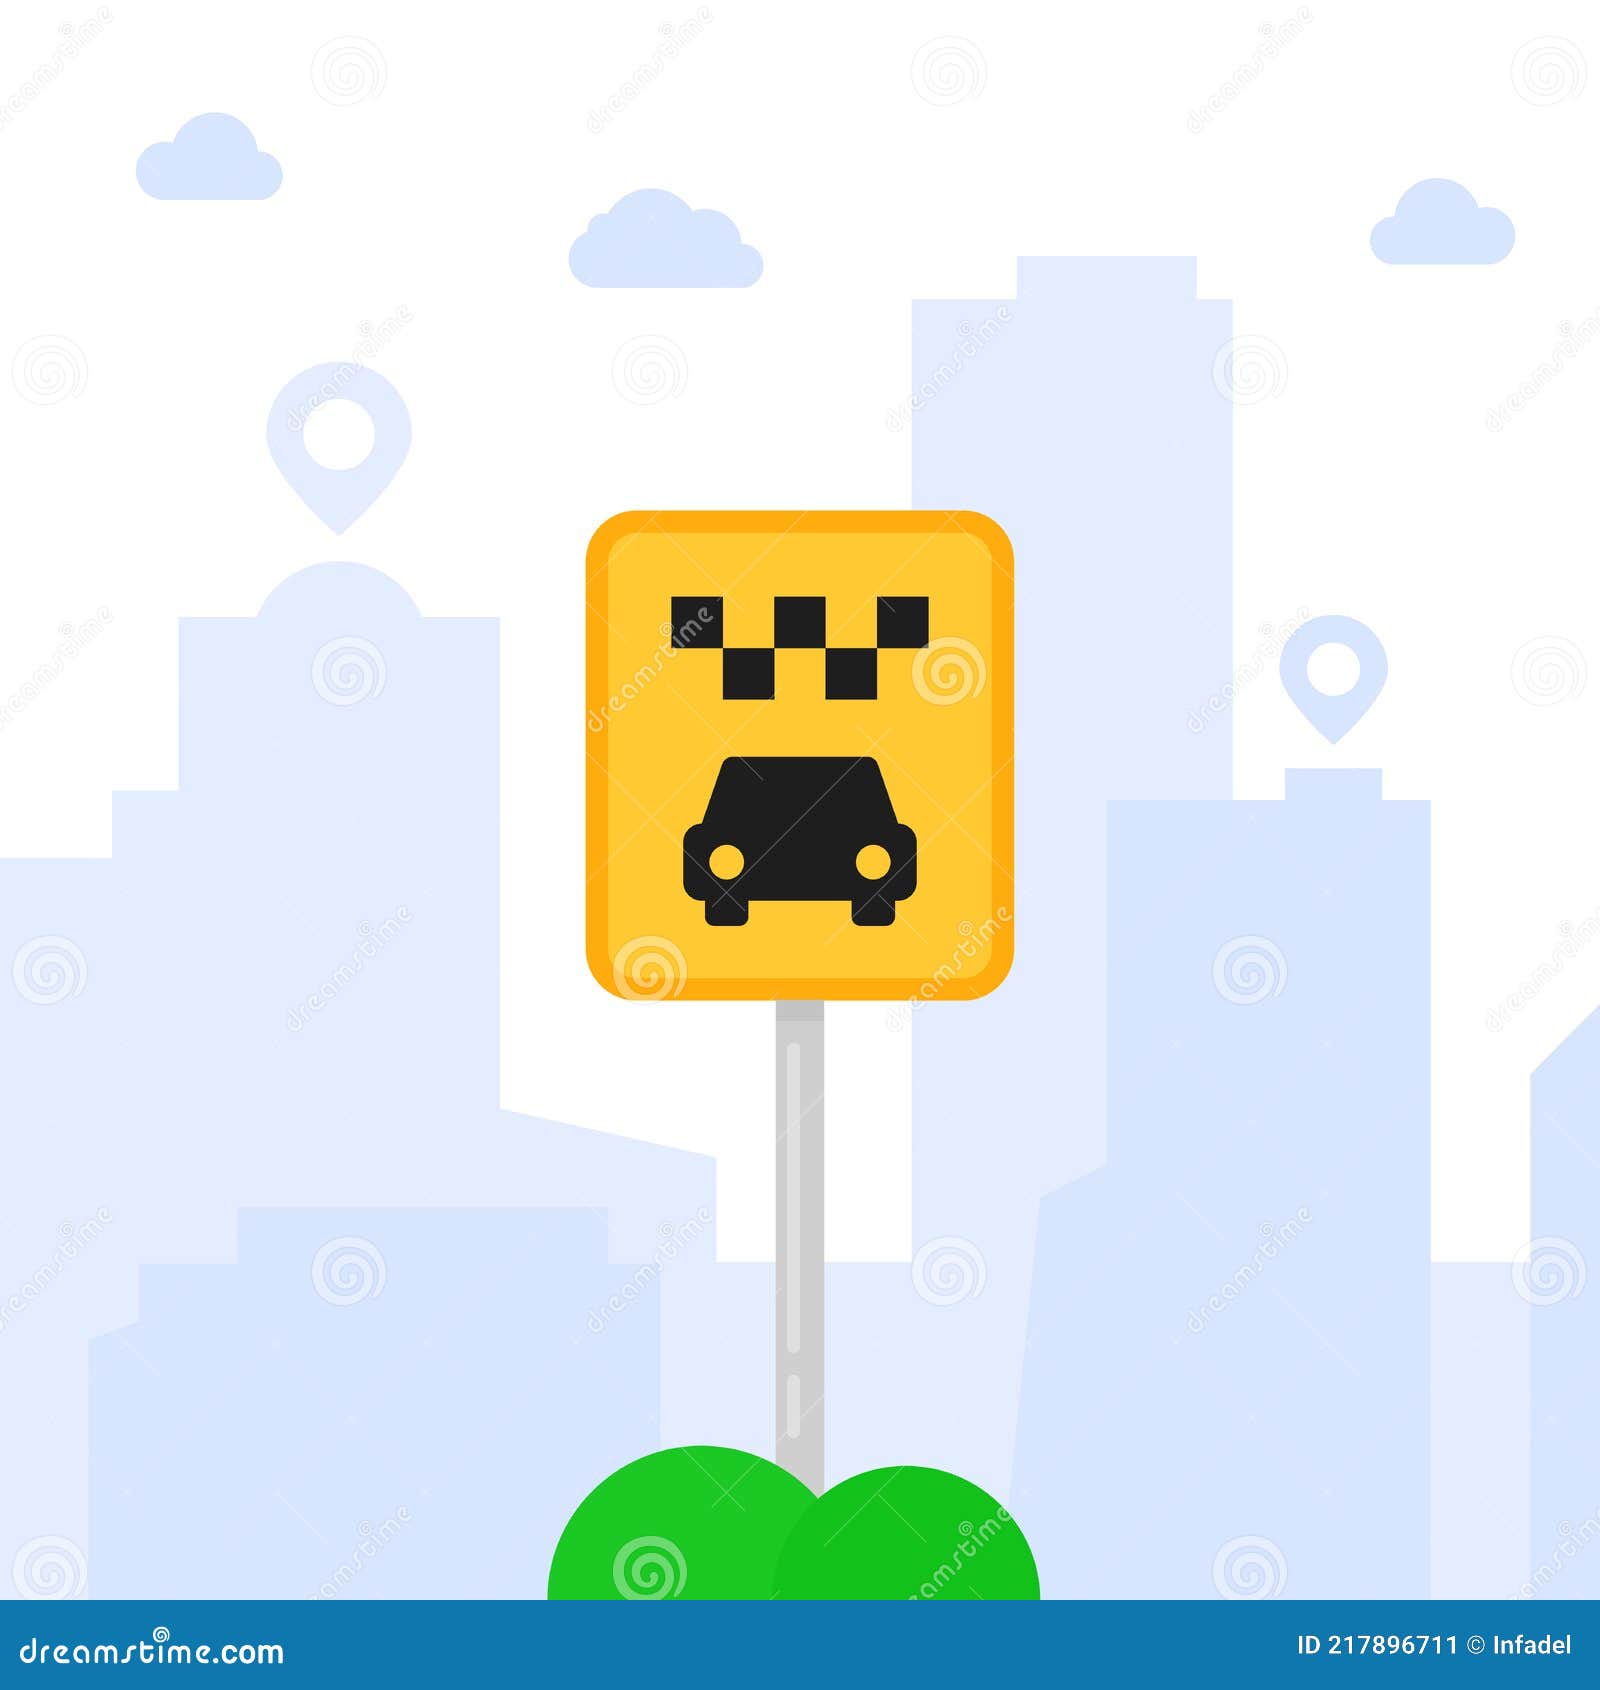 Cartoon Taxi Parking Sign in City Stock Vector - Illustration of position,  parking: 217896711